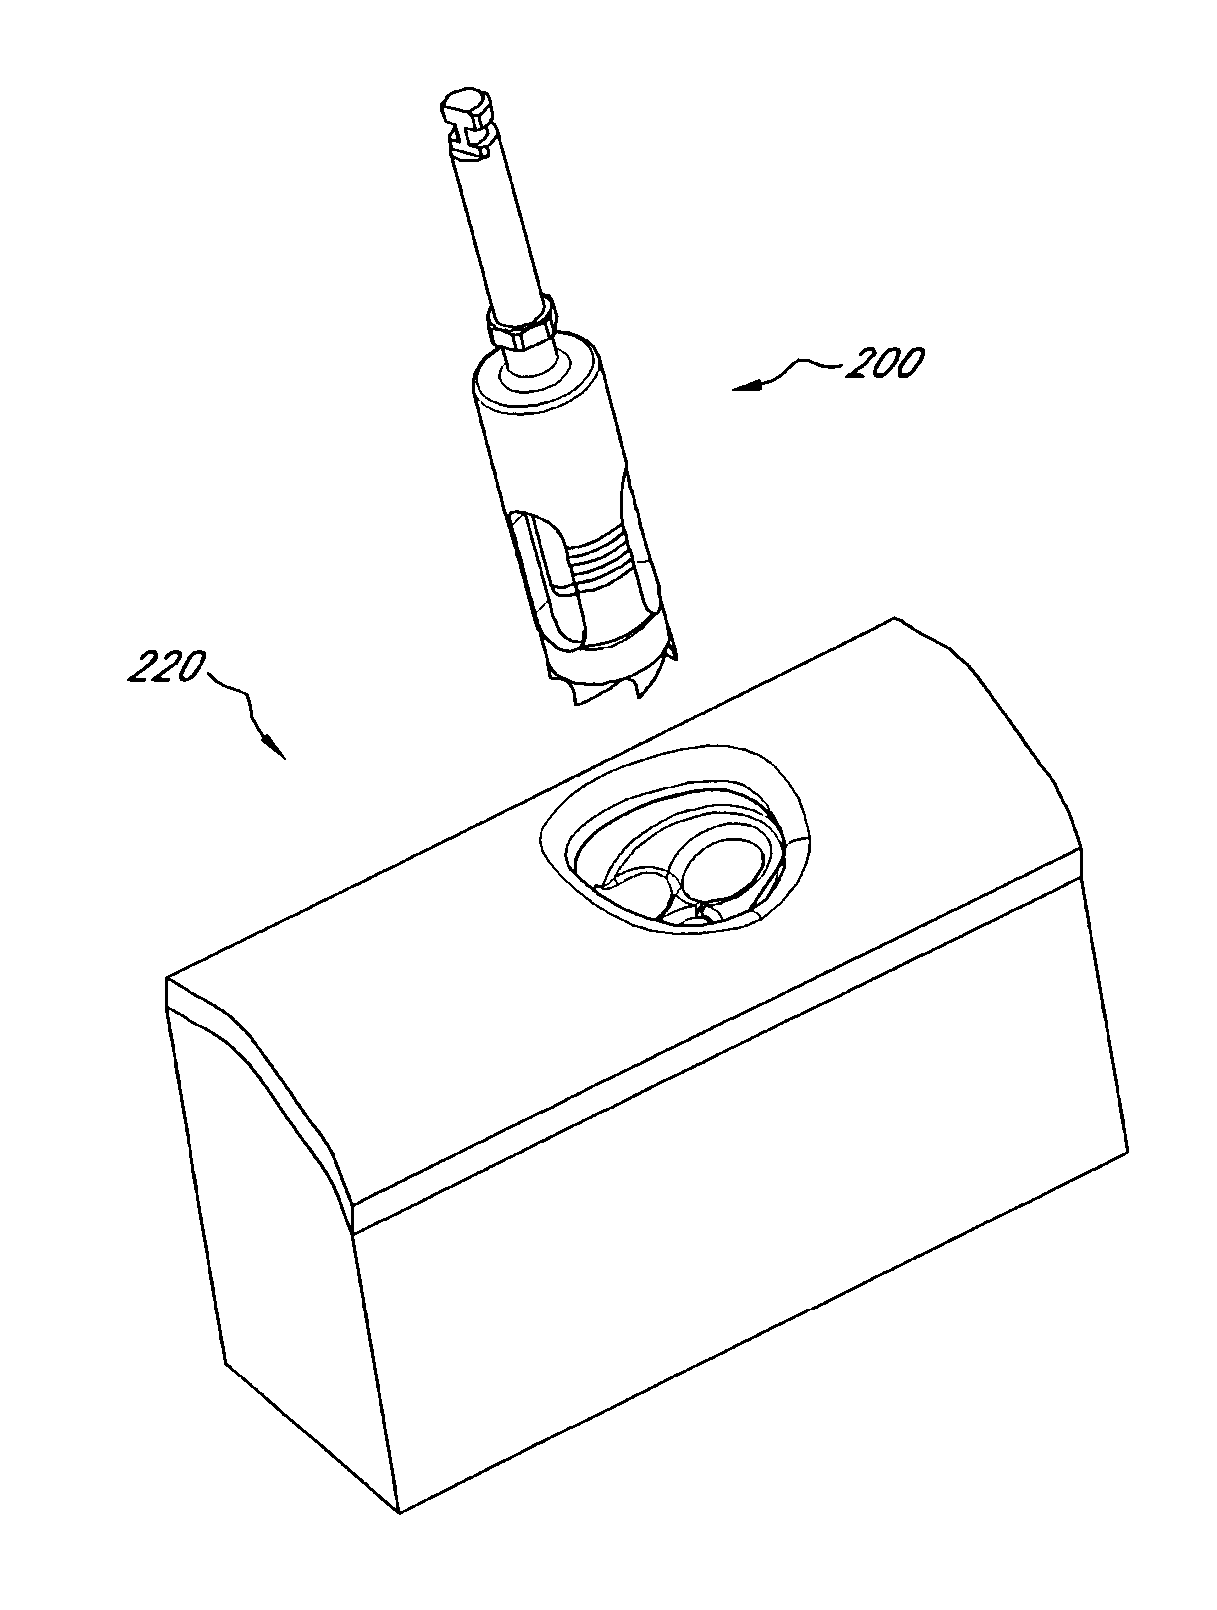 Device and procedure for implanting a dental implant